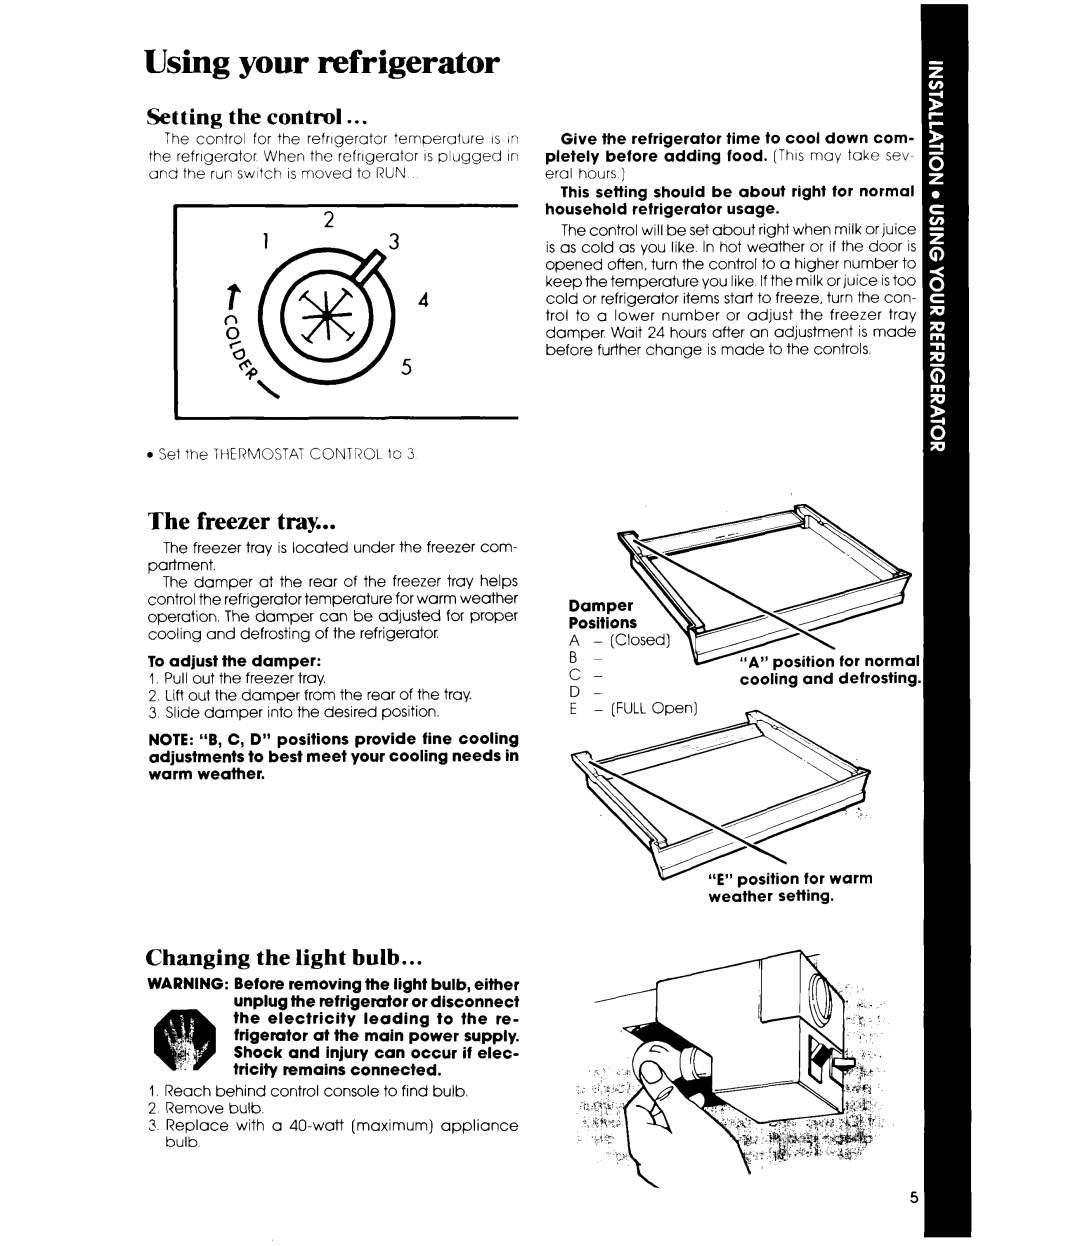 Whirlpool ELl5CCXR manual Using your refrigerator, The freezer tray, Setting the control, Changing the light bulb 